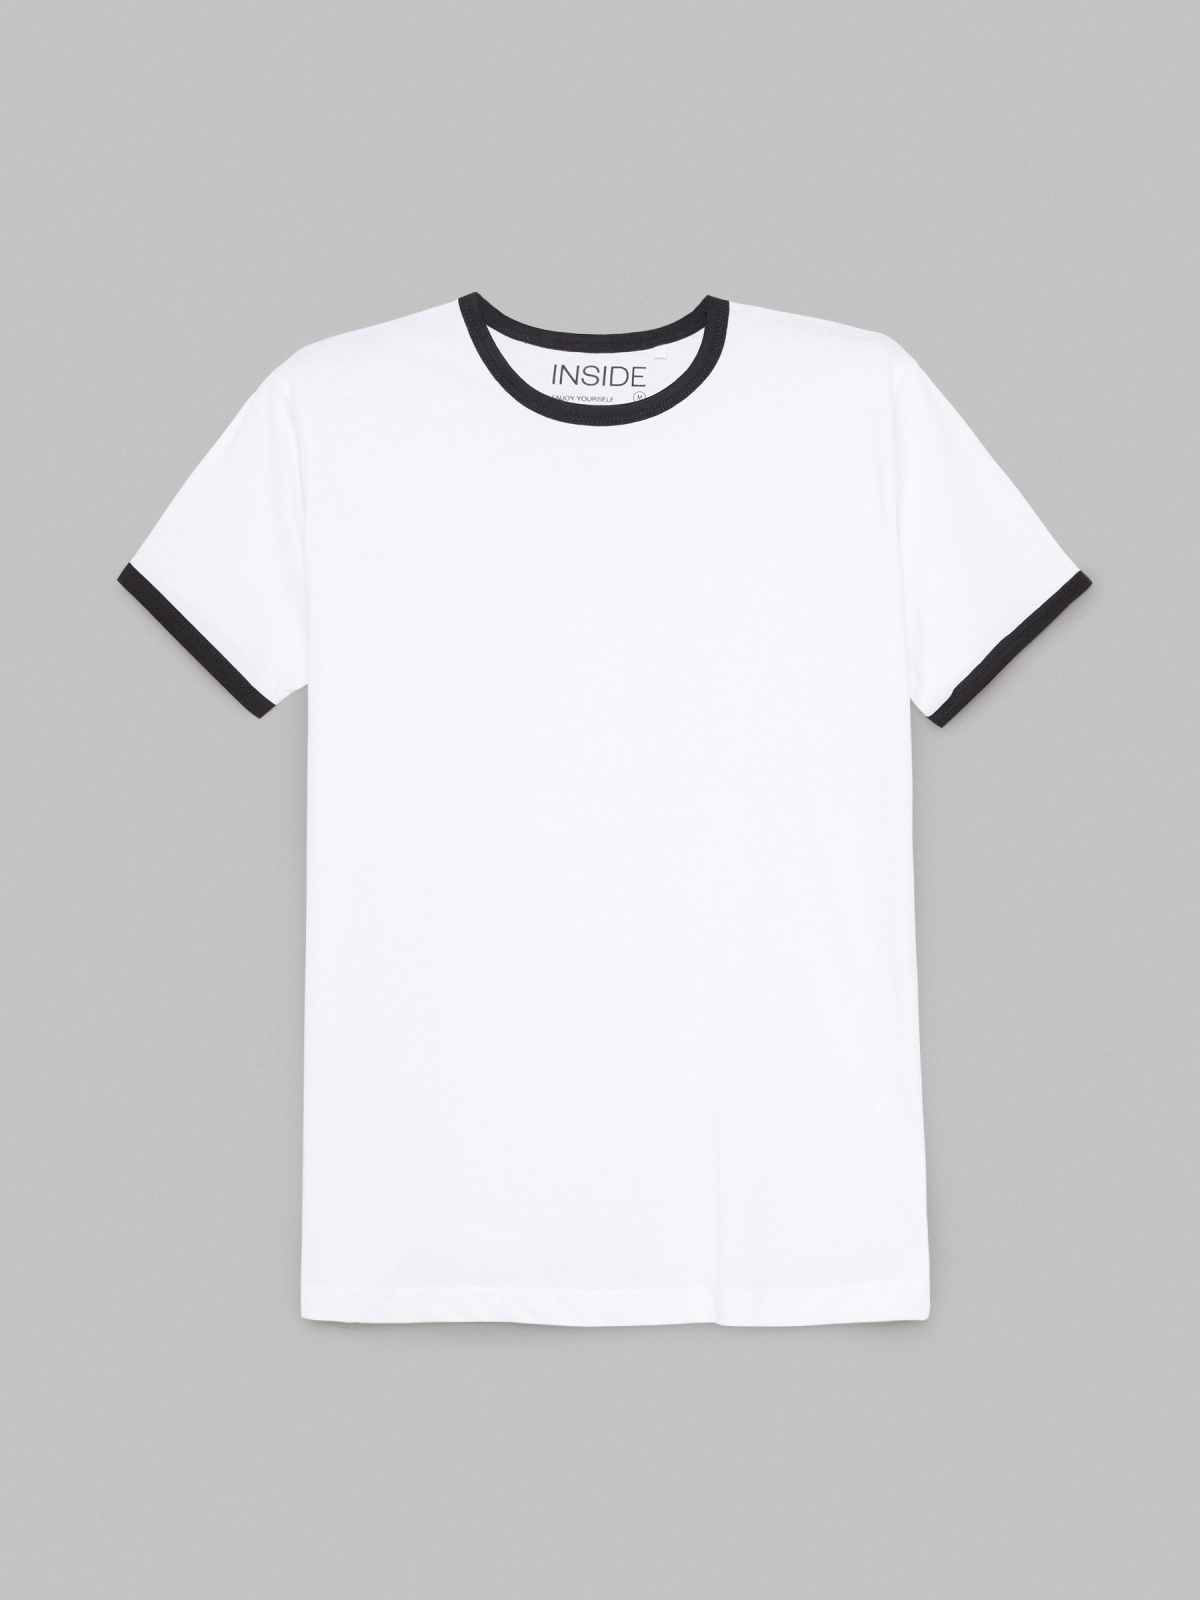  Basic T-shirt contrasts white